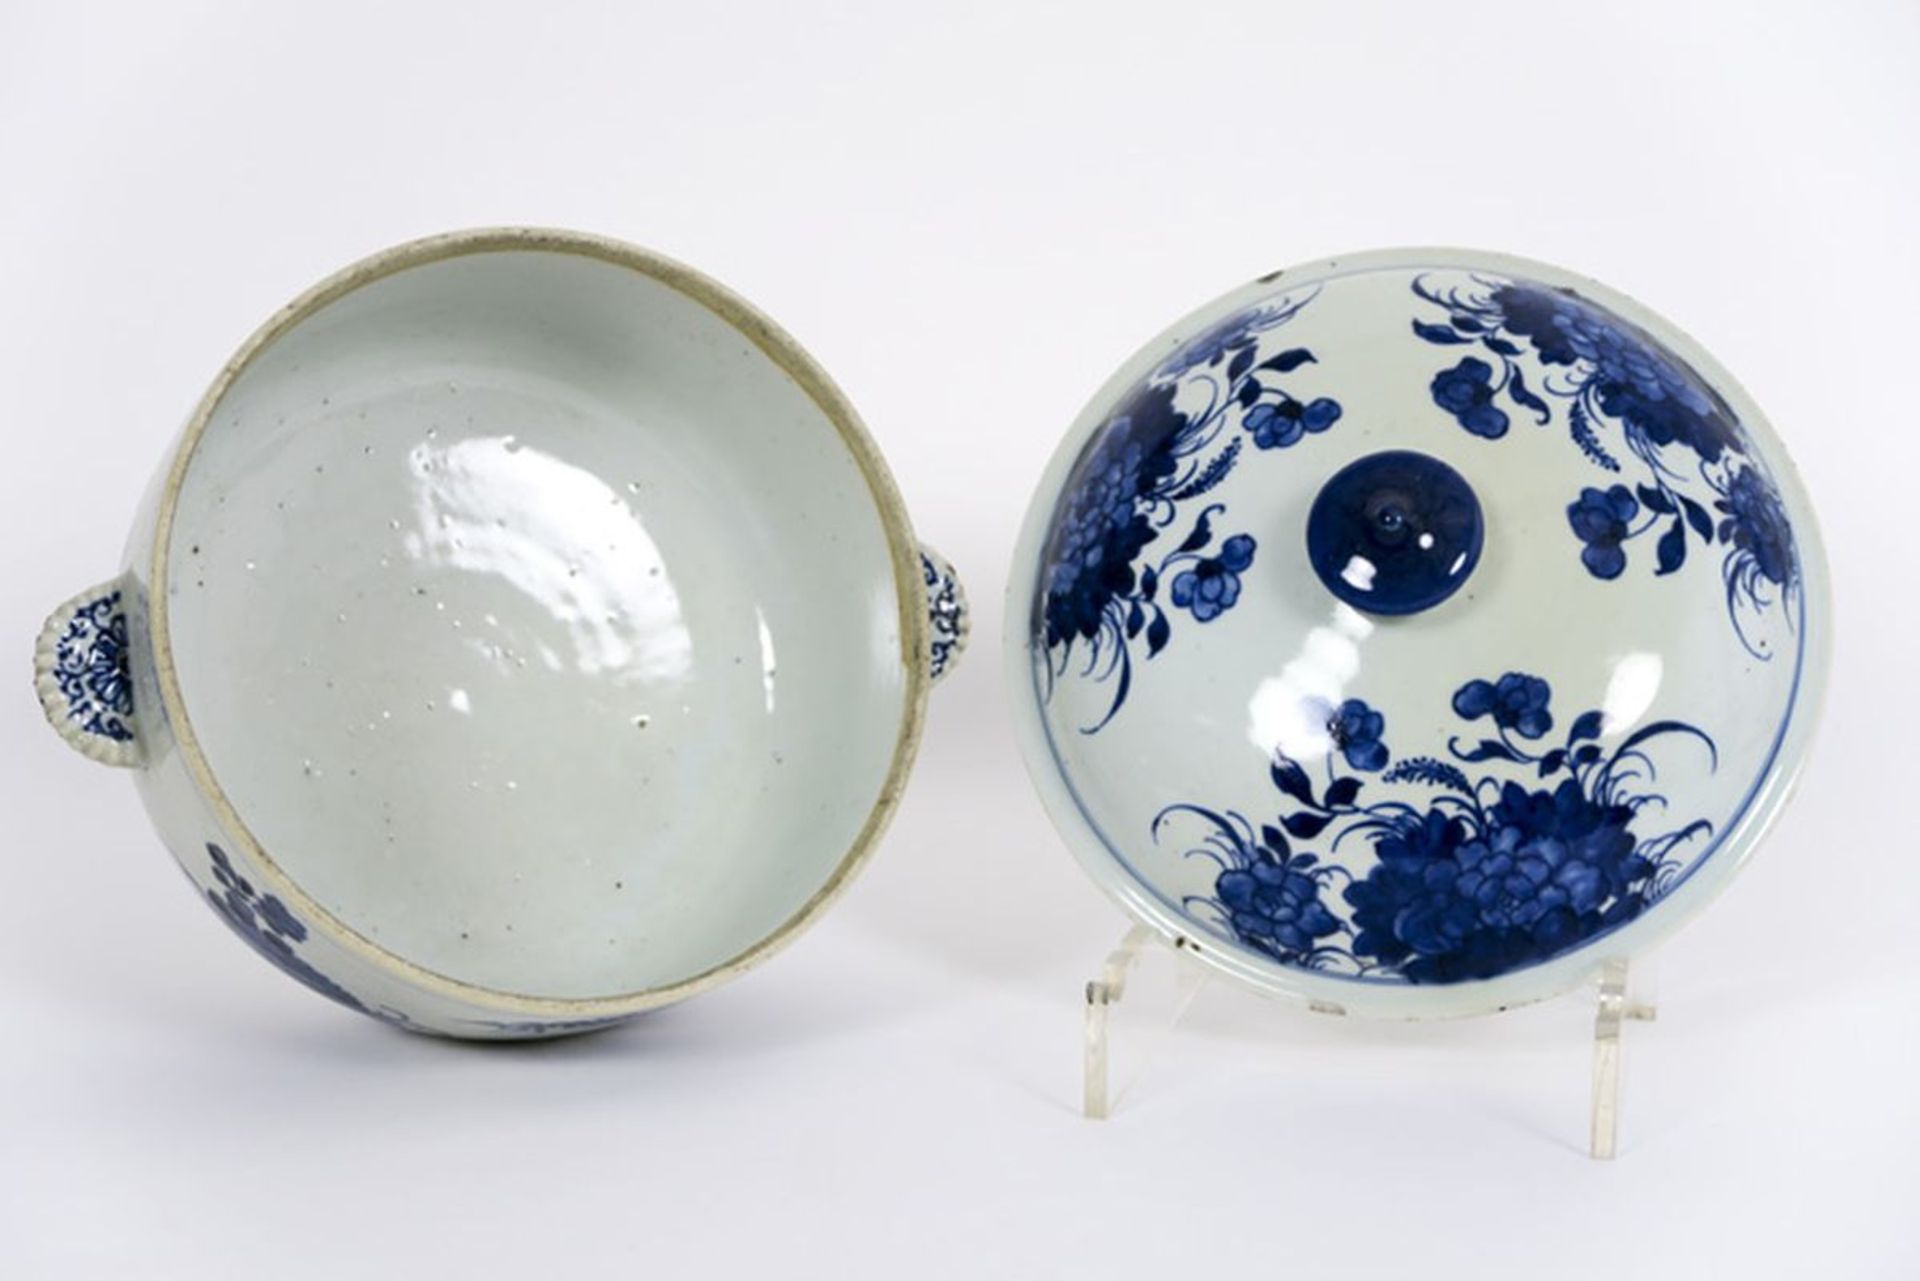 18th Cent. Chinese lidded tureen in porcelain with blue-white decor - - Achttiende [...] - Image 3 of 4